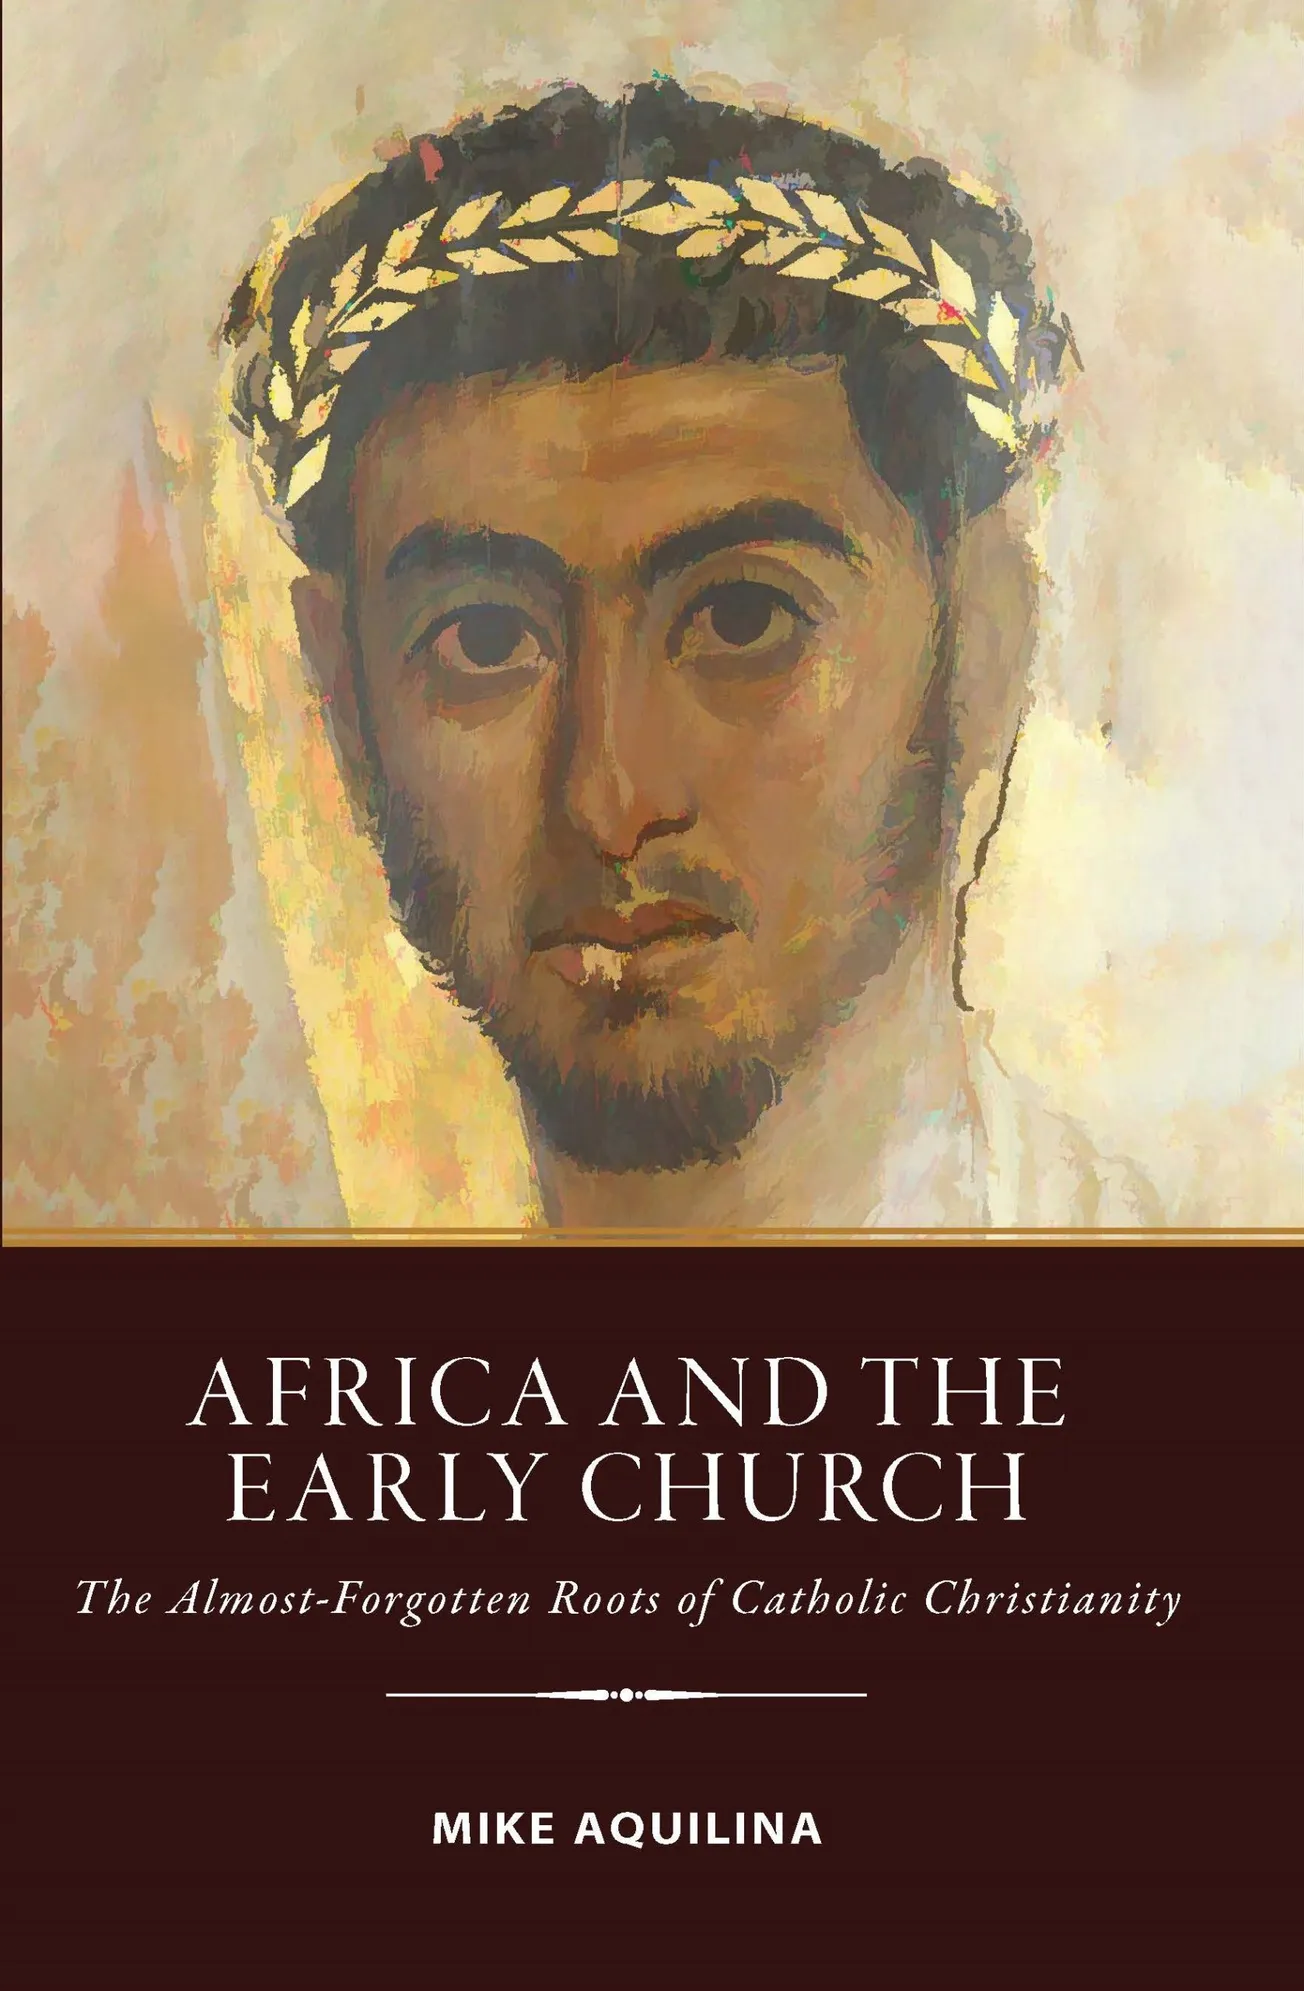 Review: 'Africa and The Early Church' an imperfect, worthwhile read